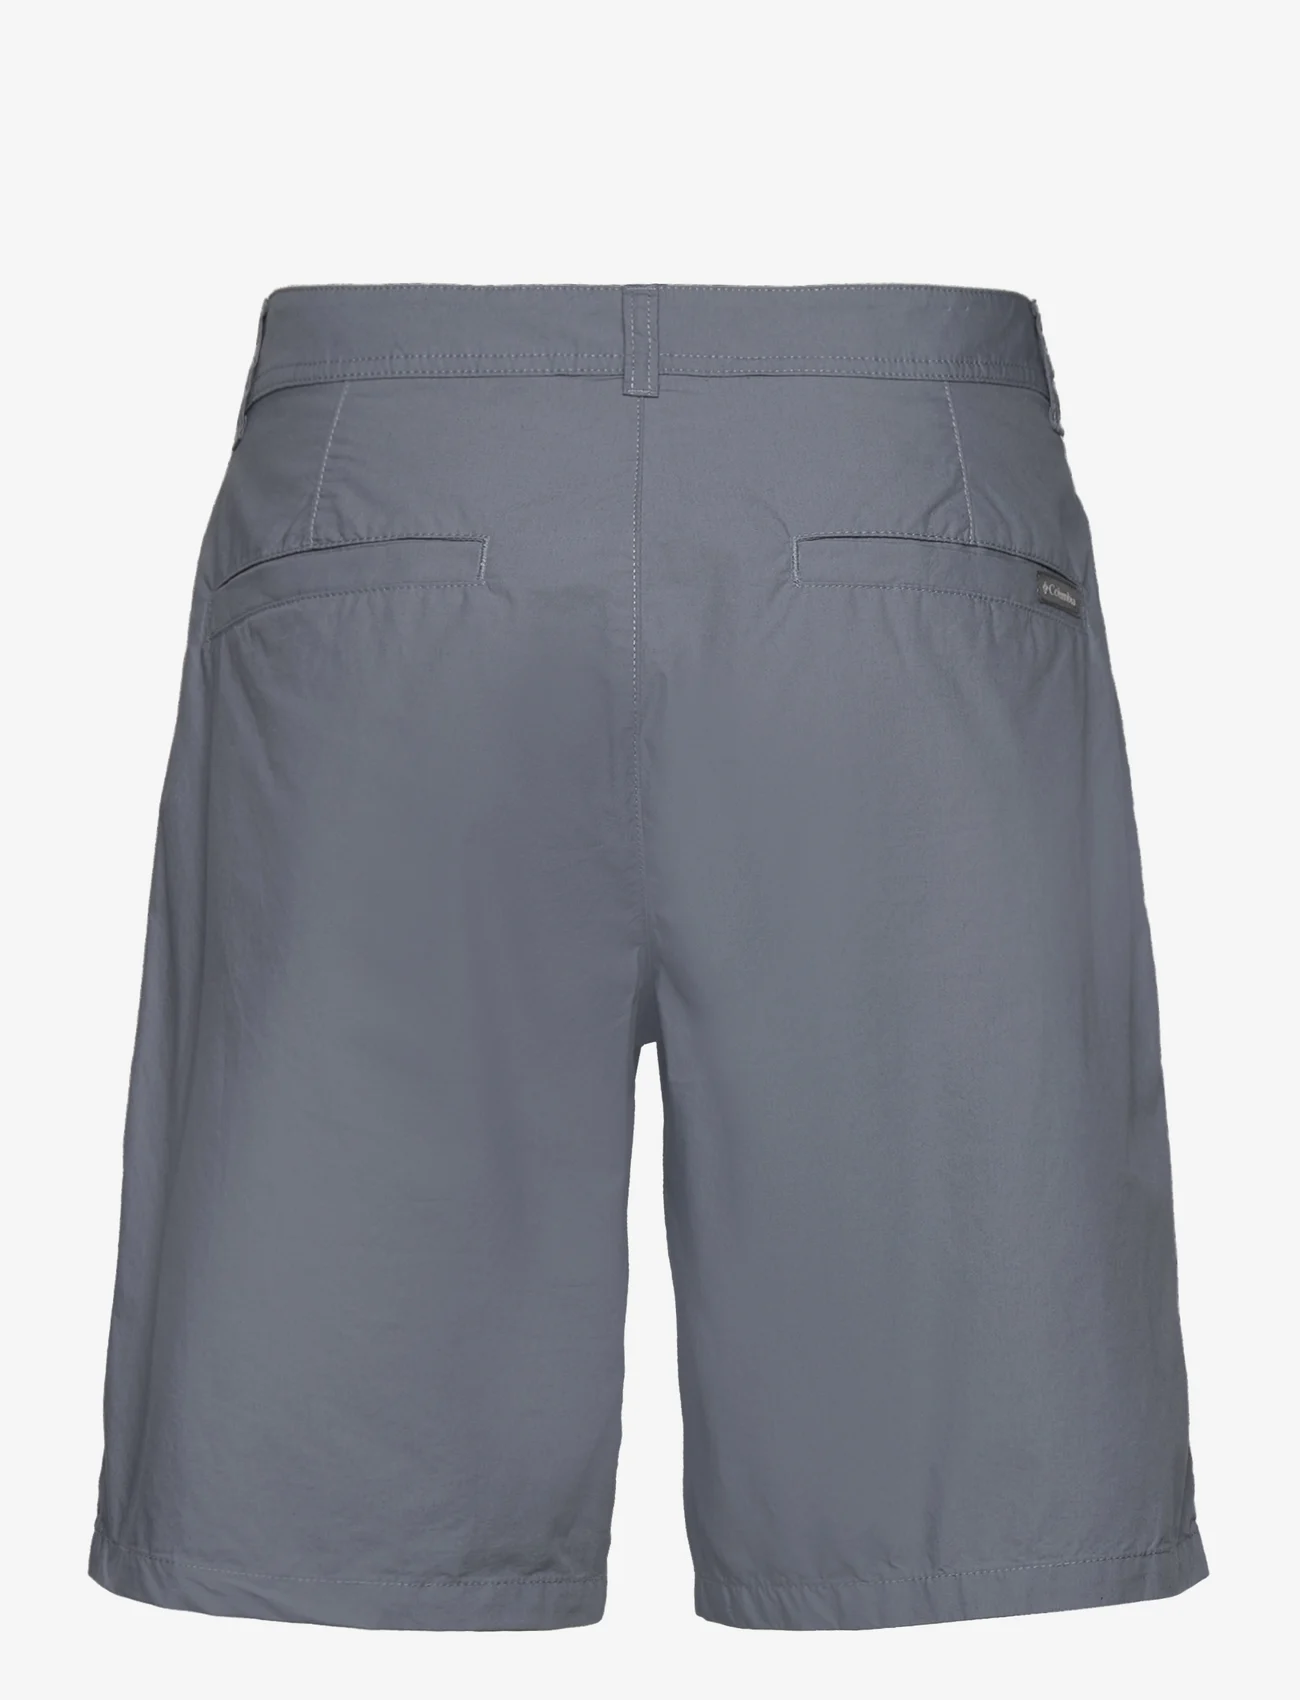 Columbia Sportswear - Washed Out Short - outdoorshorts - grey ash - 1